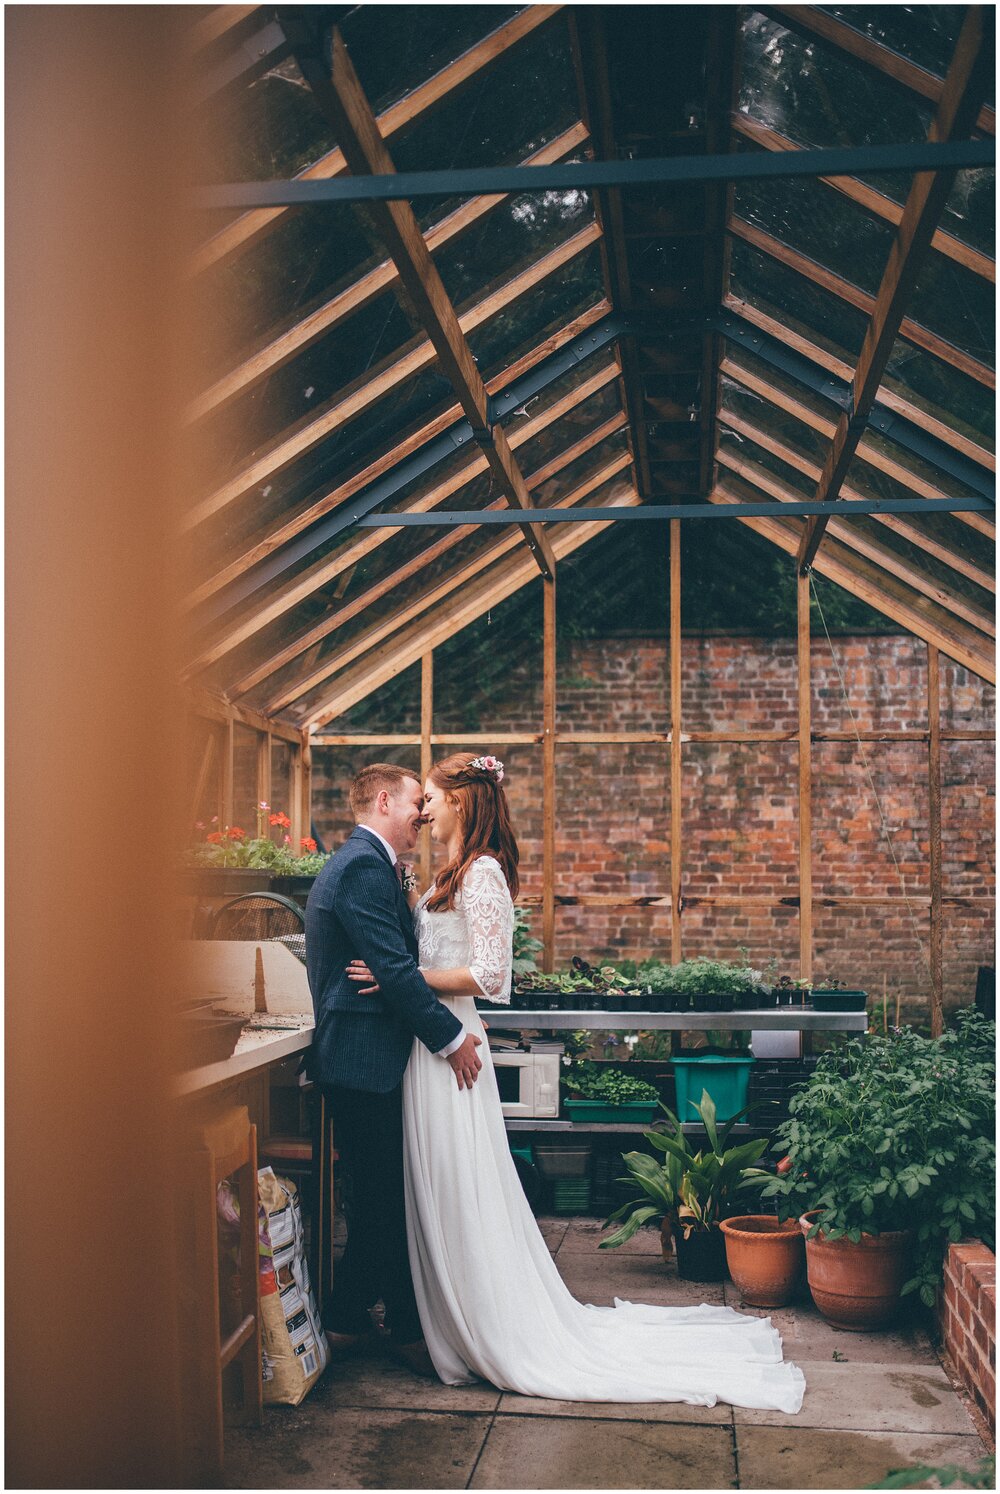 Bride and groom have their wedding photographs taken in a greenhouse at their Cheshire wedding venue.